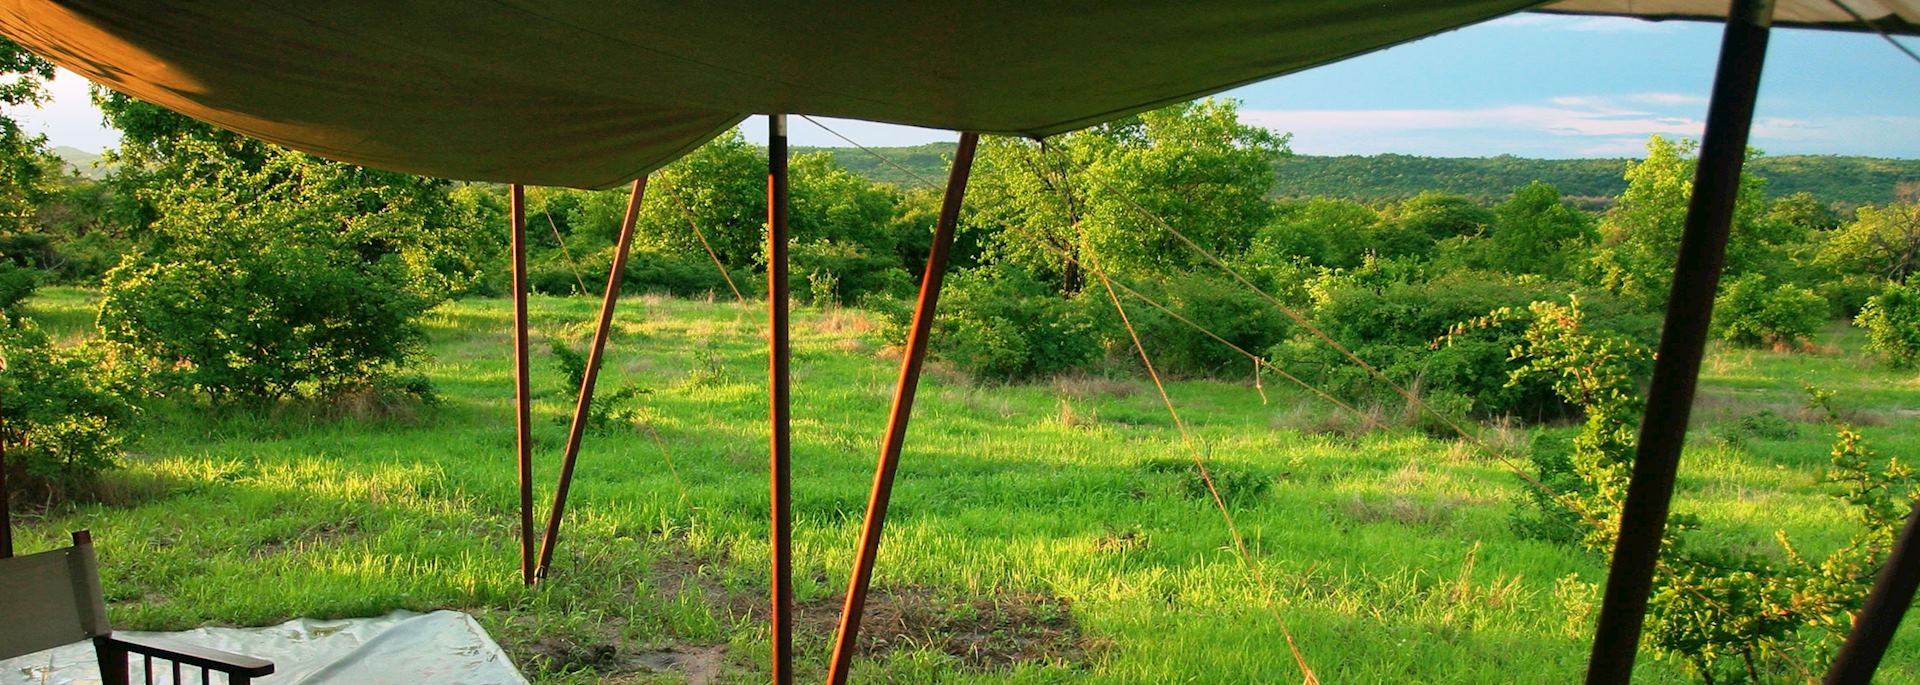 The tented camp of Kwihala in Ruaha National Park